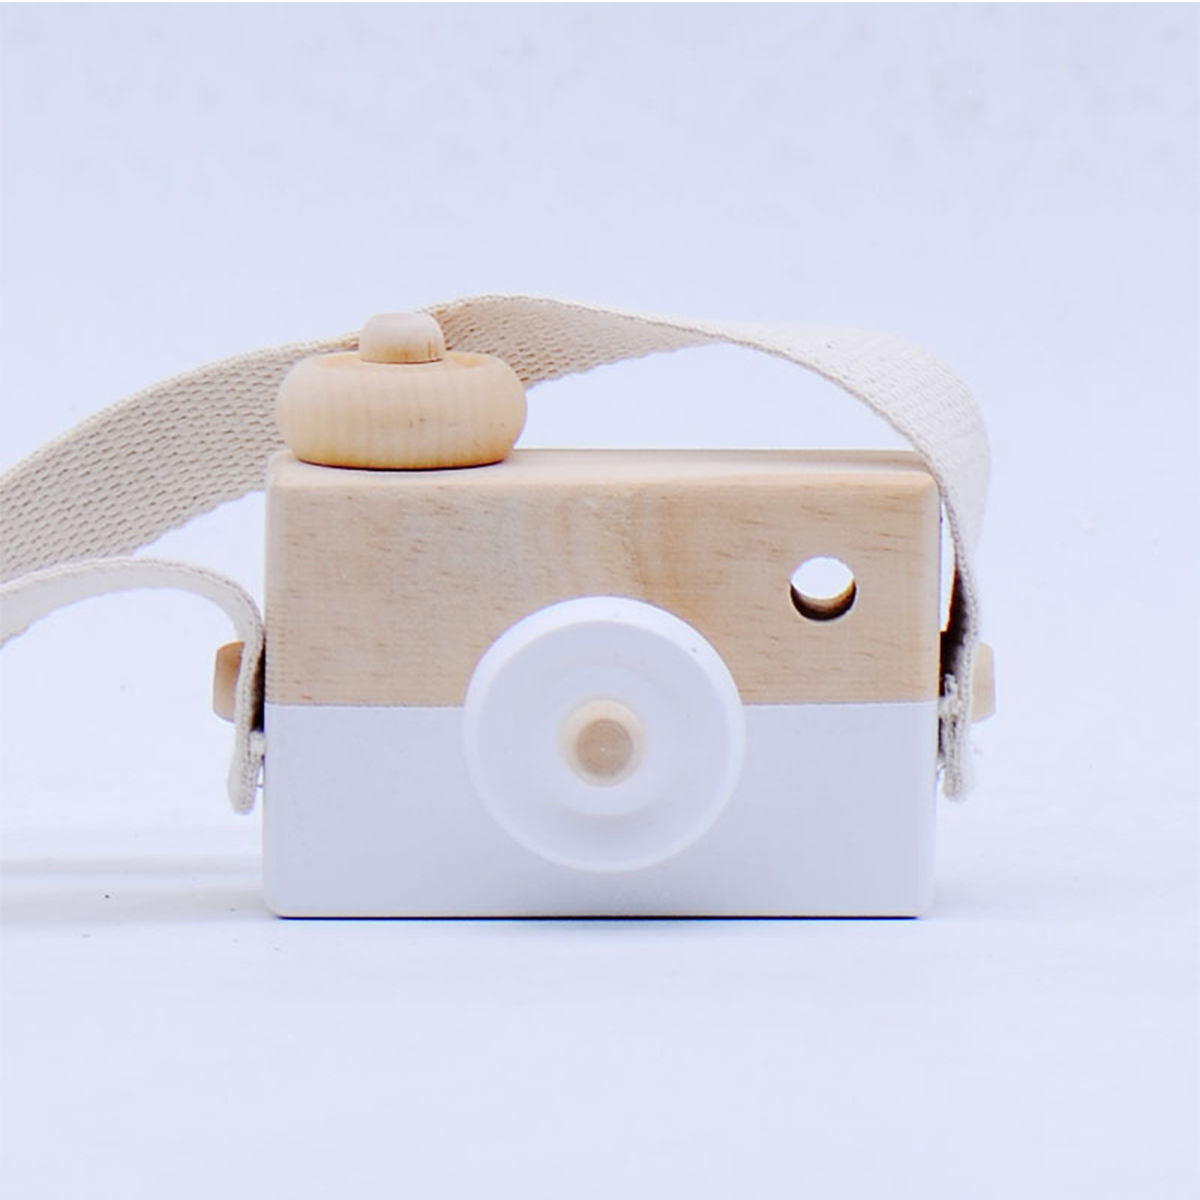 Wearable-Childrens-Wooden-Camera-Ornaments-Mini-Portable-Educational-Toys-Photography-Cute-Props-1573498-6